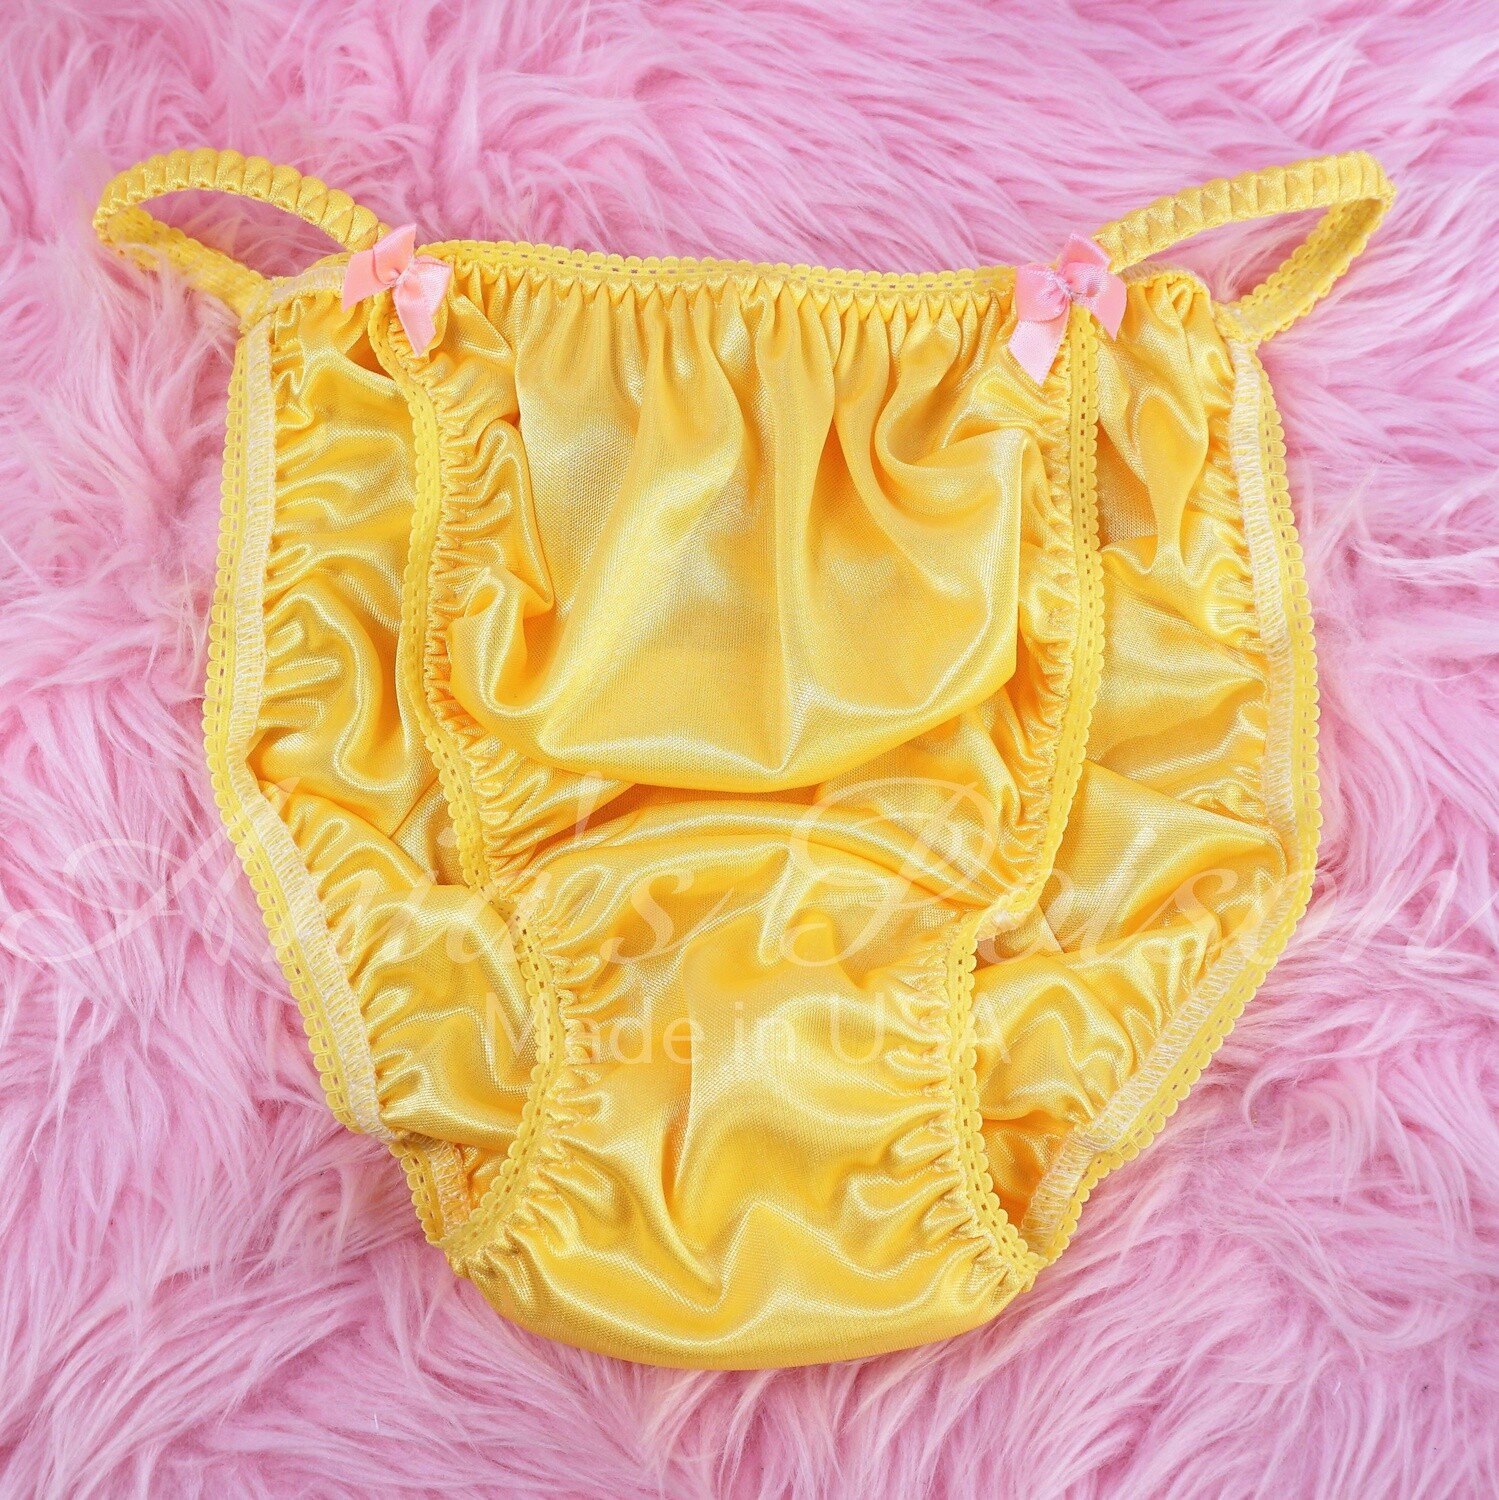 Ania's Poison MANties S - XL shiny Rare spring Yellow Butter Soft polyester string bikini sissy mens underwear panties